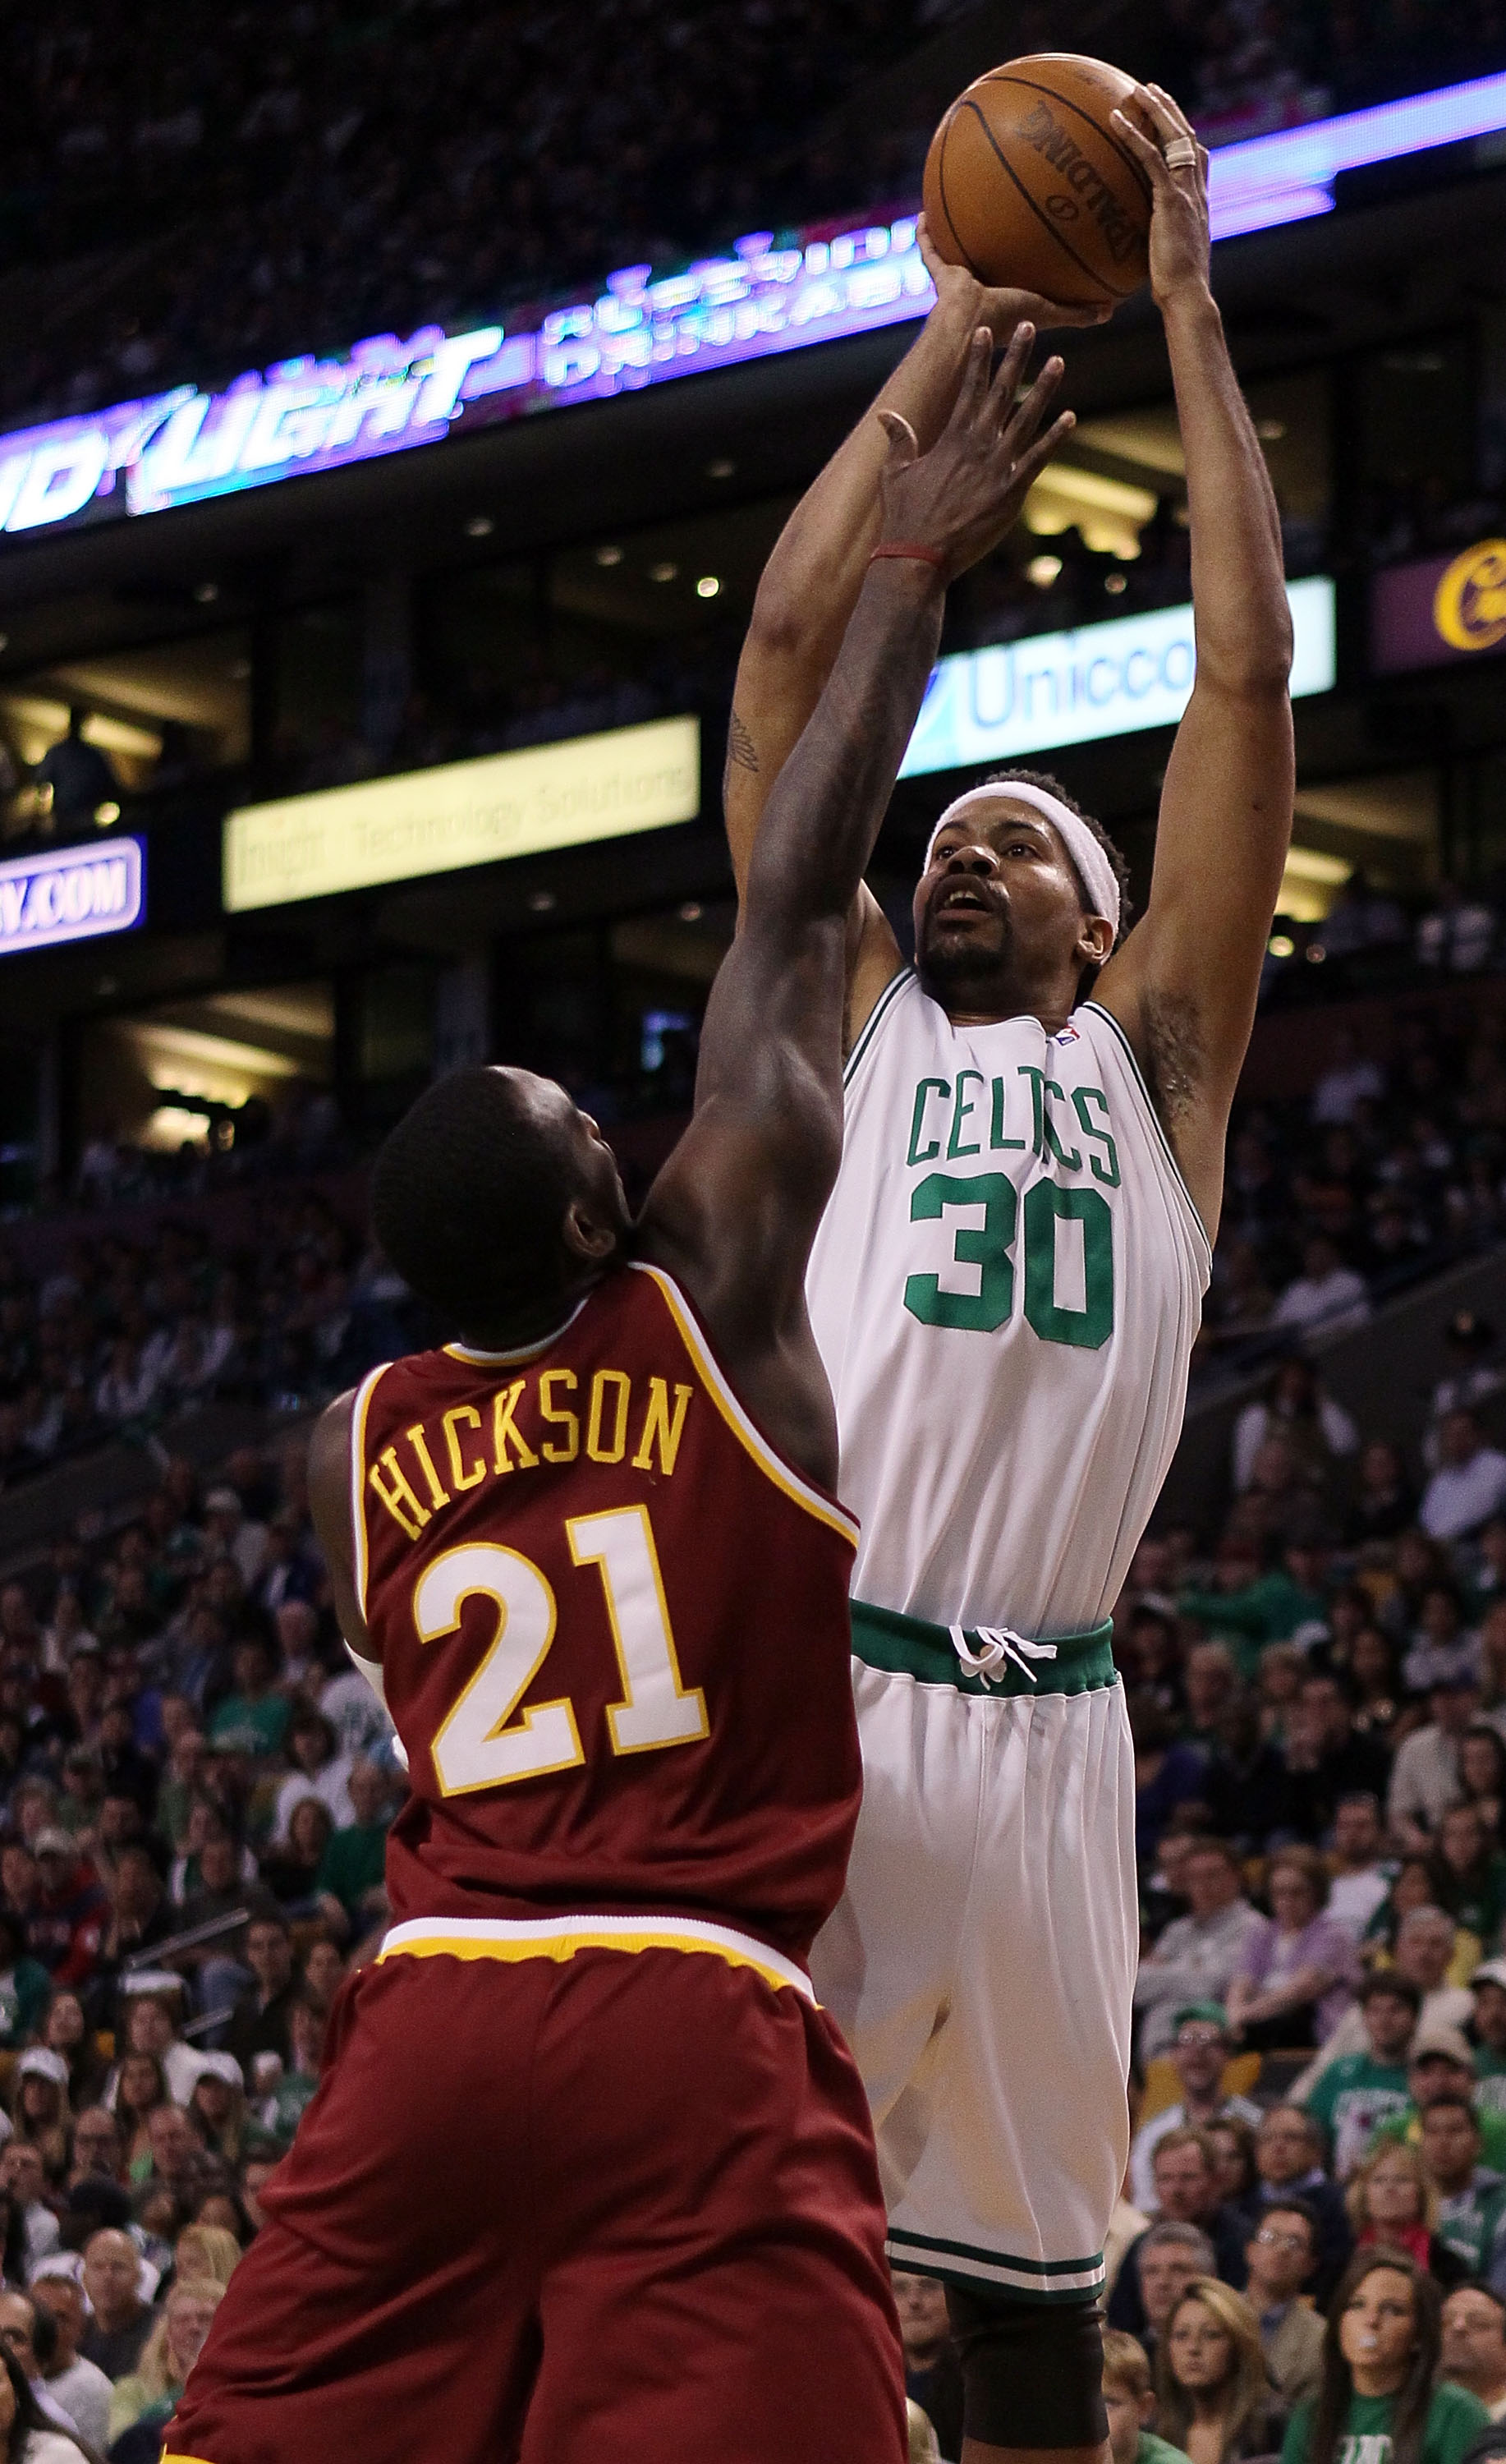 BOSTON - MAY 09:  Rasheed Wallace #30 of the Boston Celtics takes a shot as J.J. Hickson #21 of the Cleveland Cavaliers defends during Game Four of the Eastern Conference Semifinals of the 2010 NBA playoffs at TD Garden on May 9, 2010 in Boston, Massachus